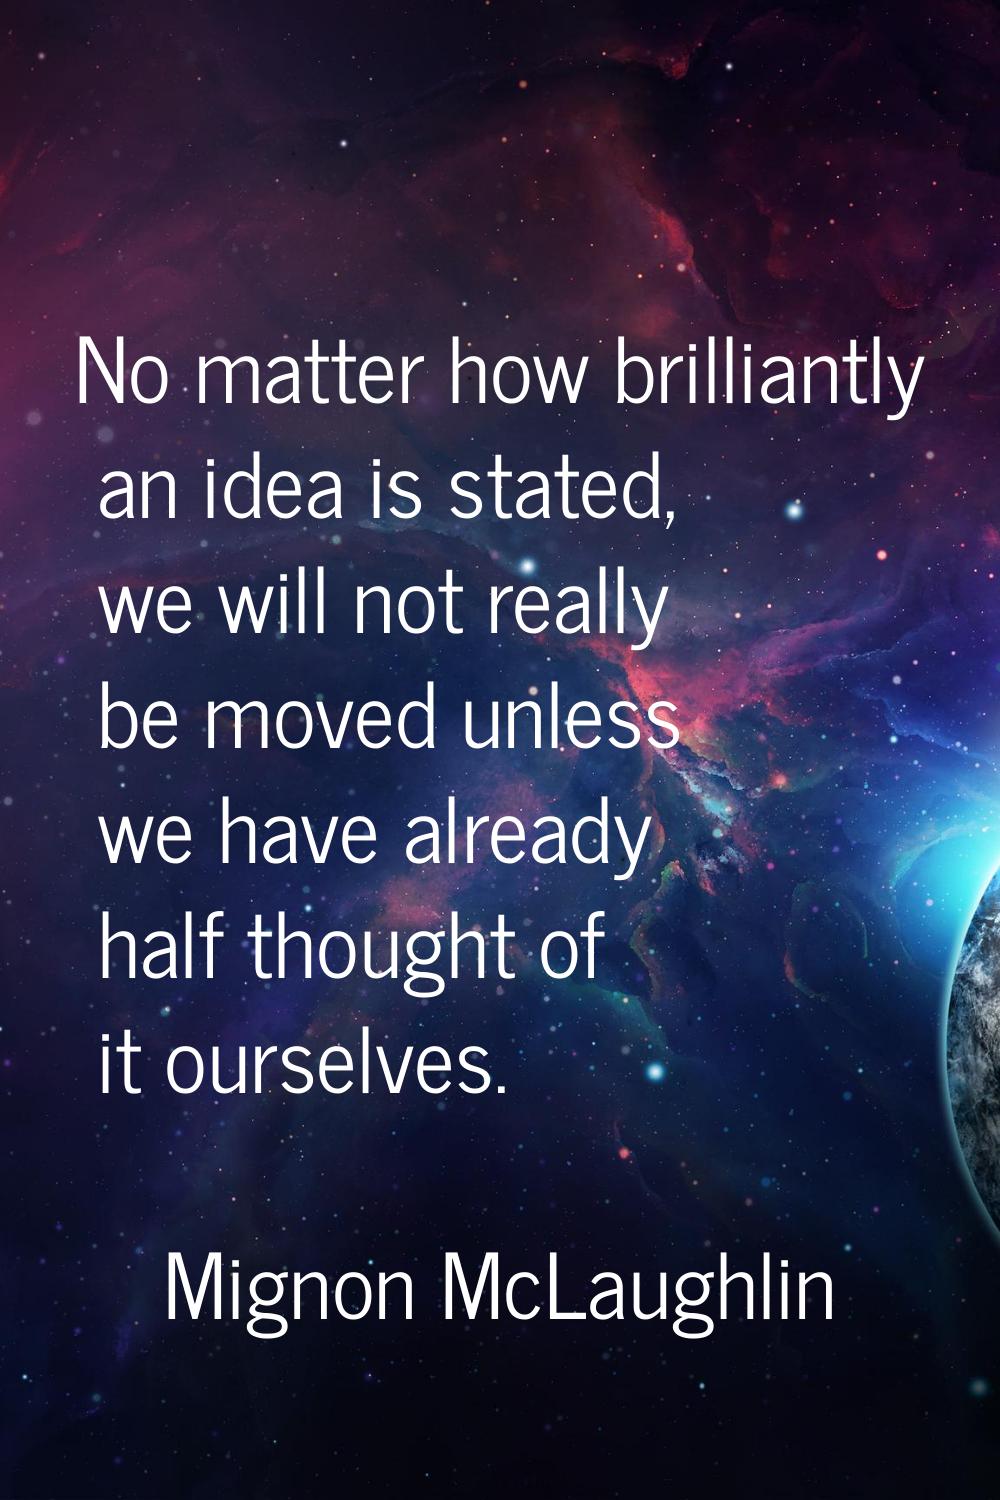 No matter how brilliantly an idea is stated, we will not really be moved unless we have already hal